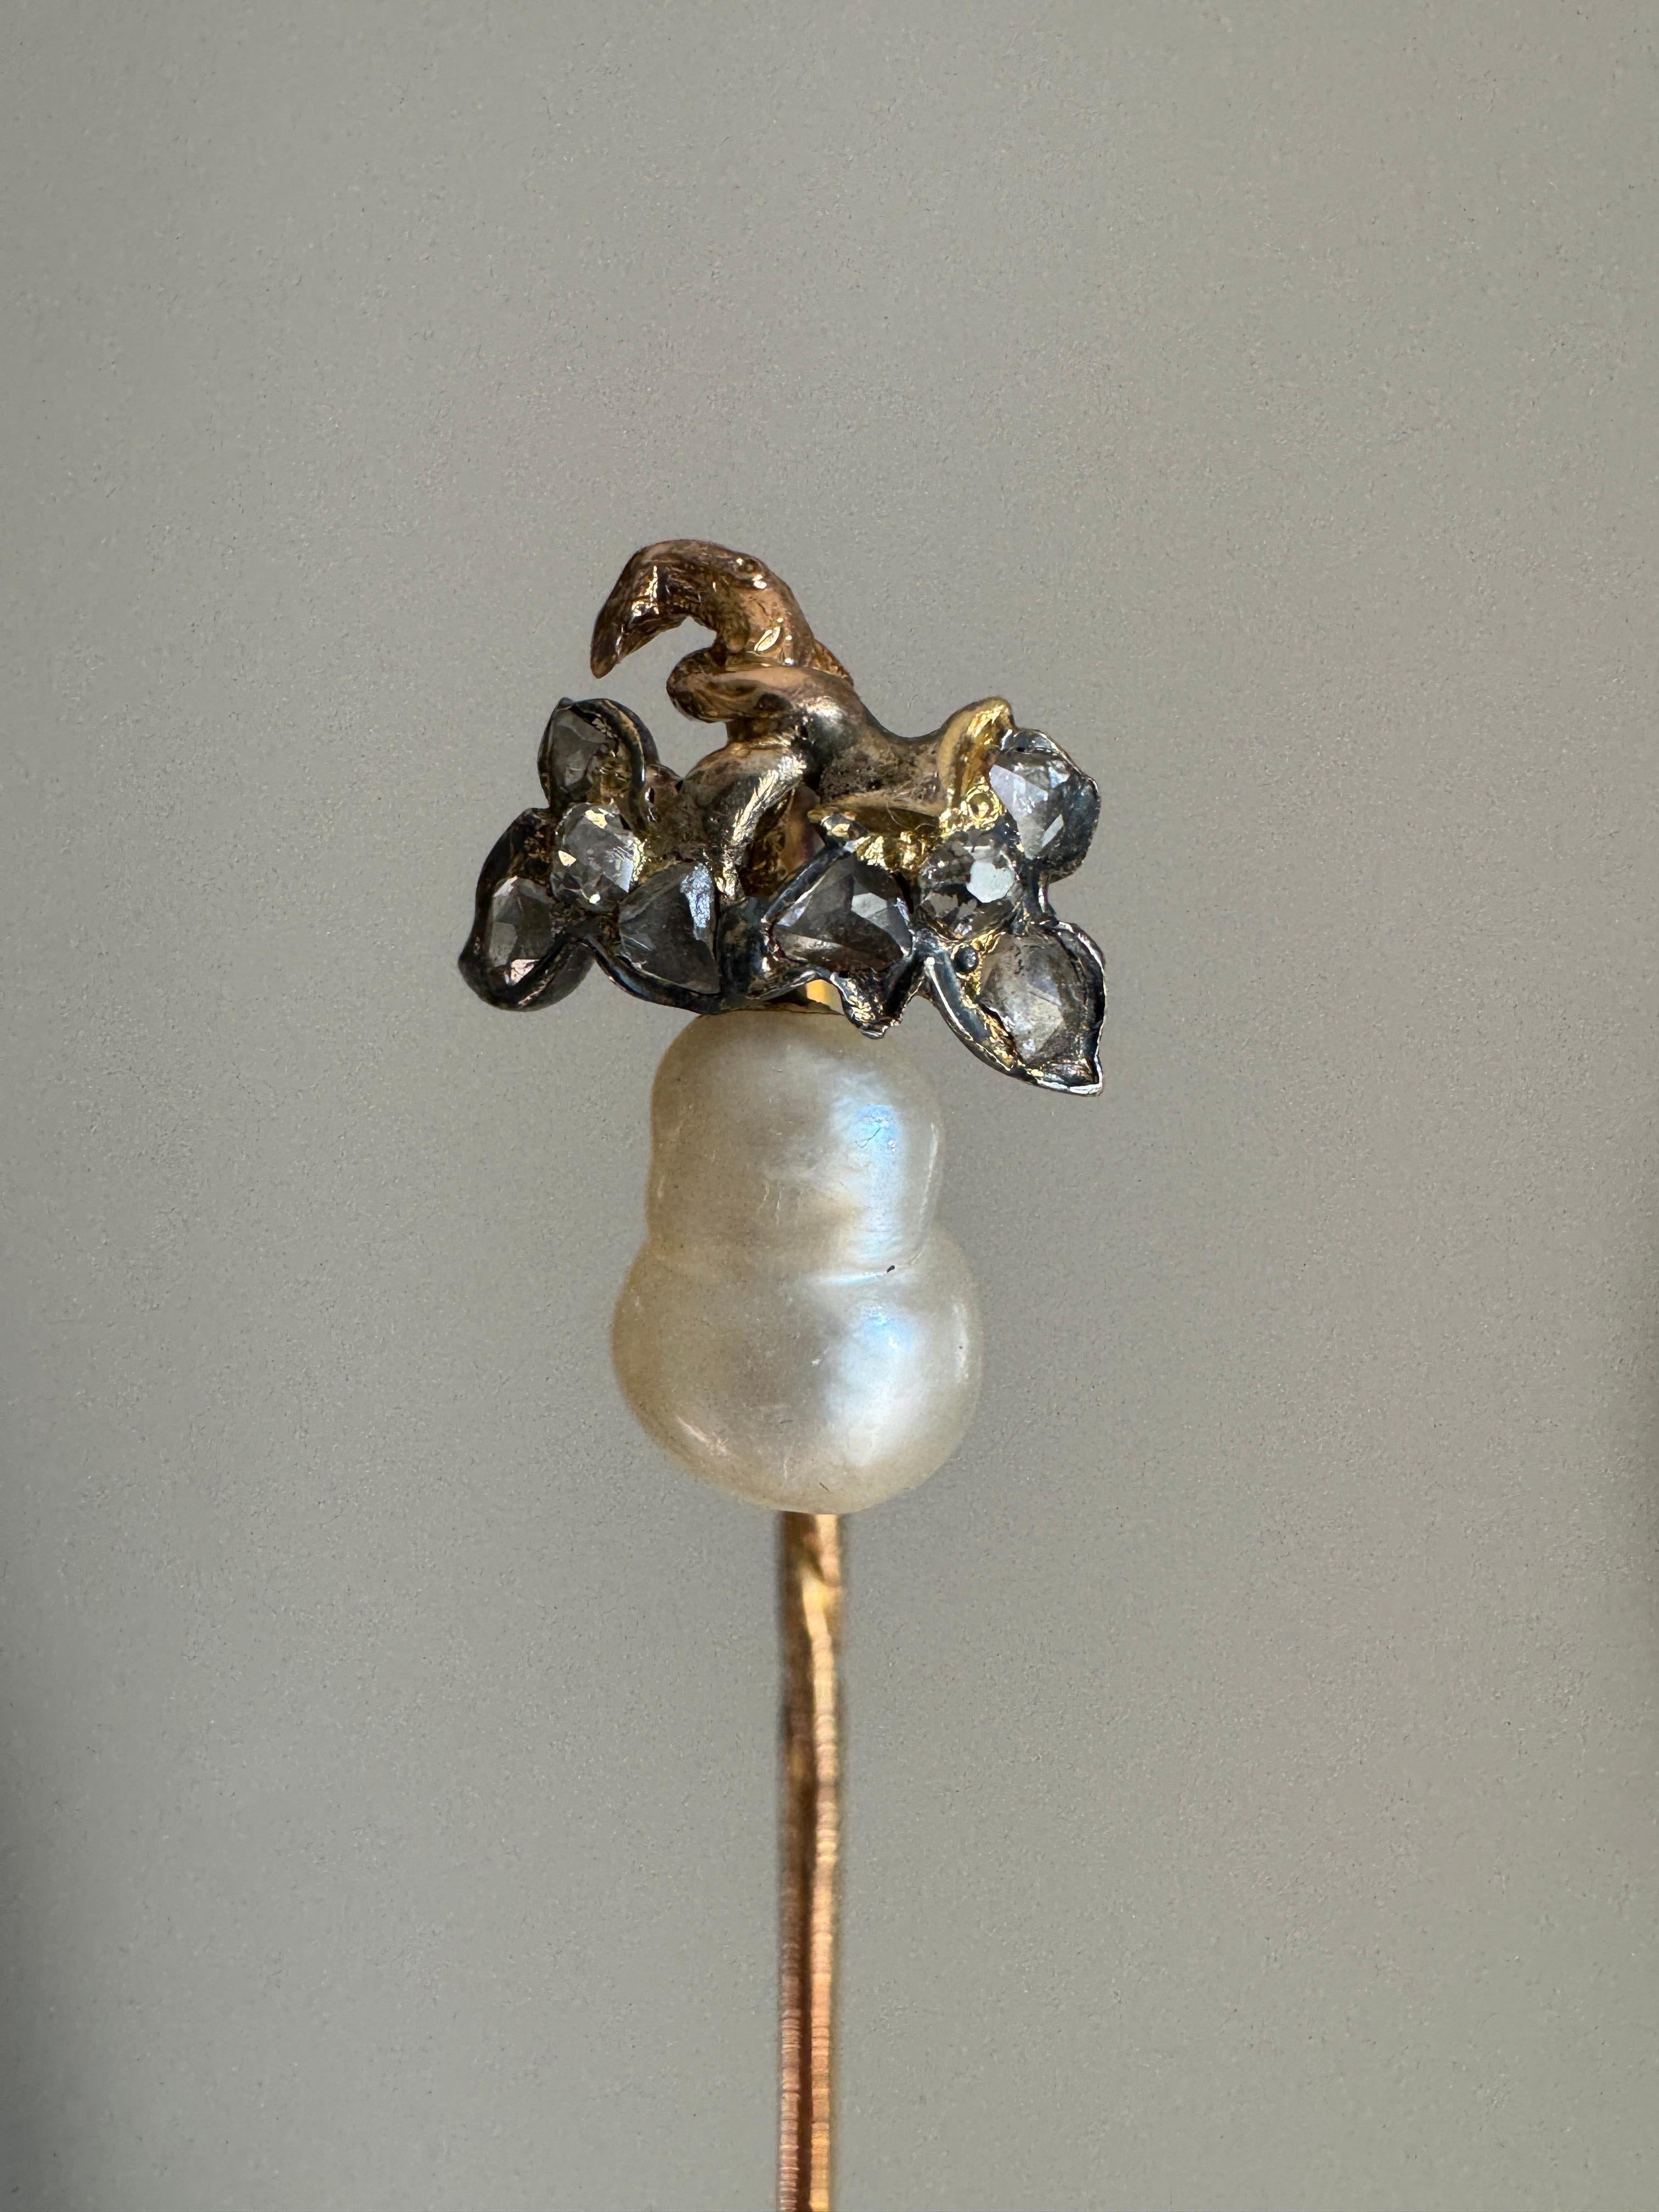 This precious pearl wonder dates to the mid 19th C France. Artfully hand fabricated in silver and 18 karat gold, a lustrous pear shaped pearl is perfectly adorned by a pair of softly shimmering diamond-set leaves. A miniature work of art!

Pearl: